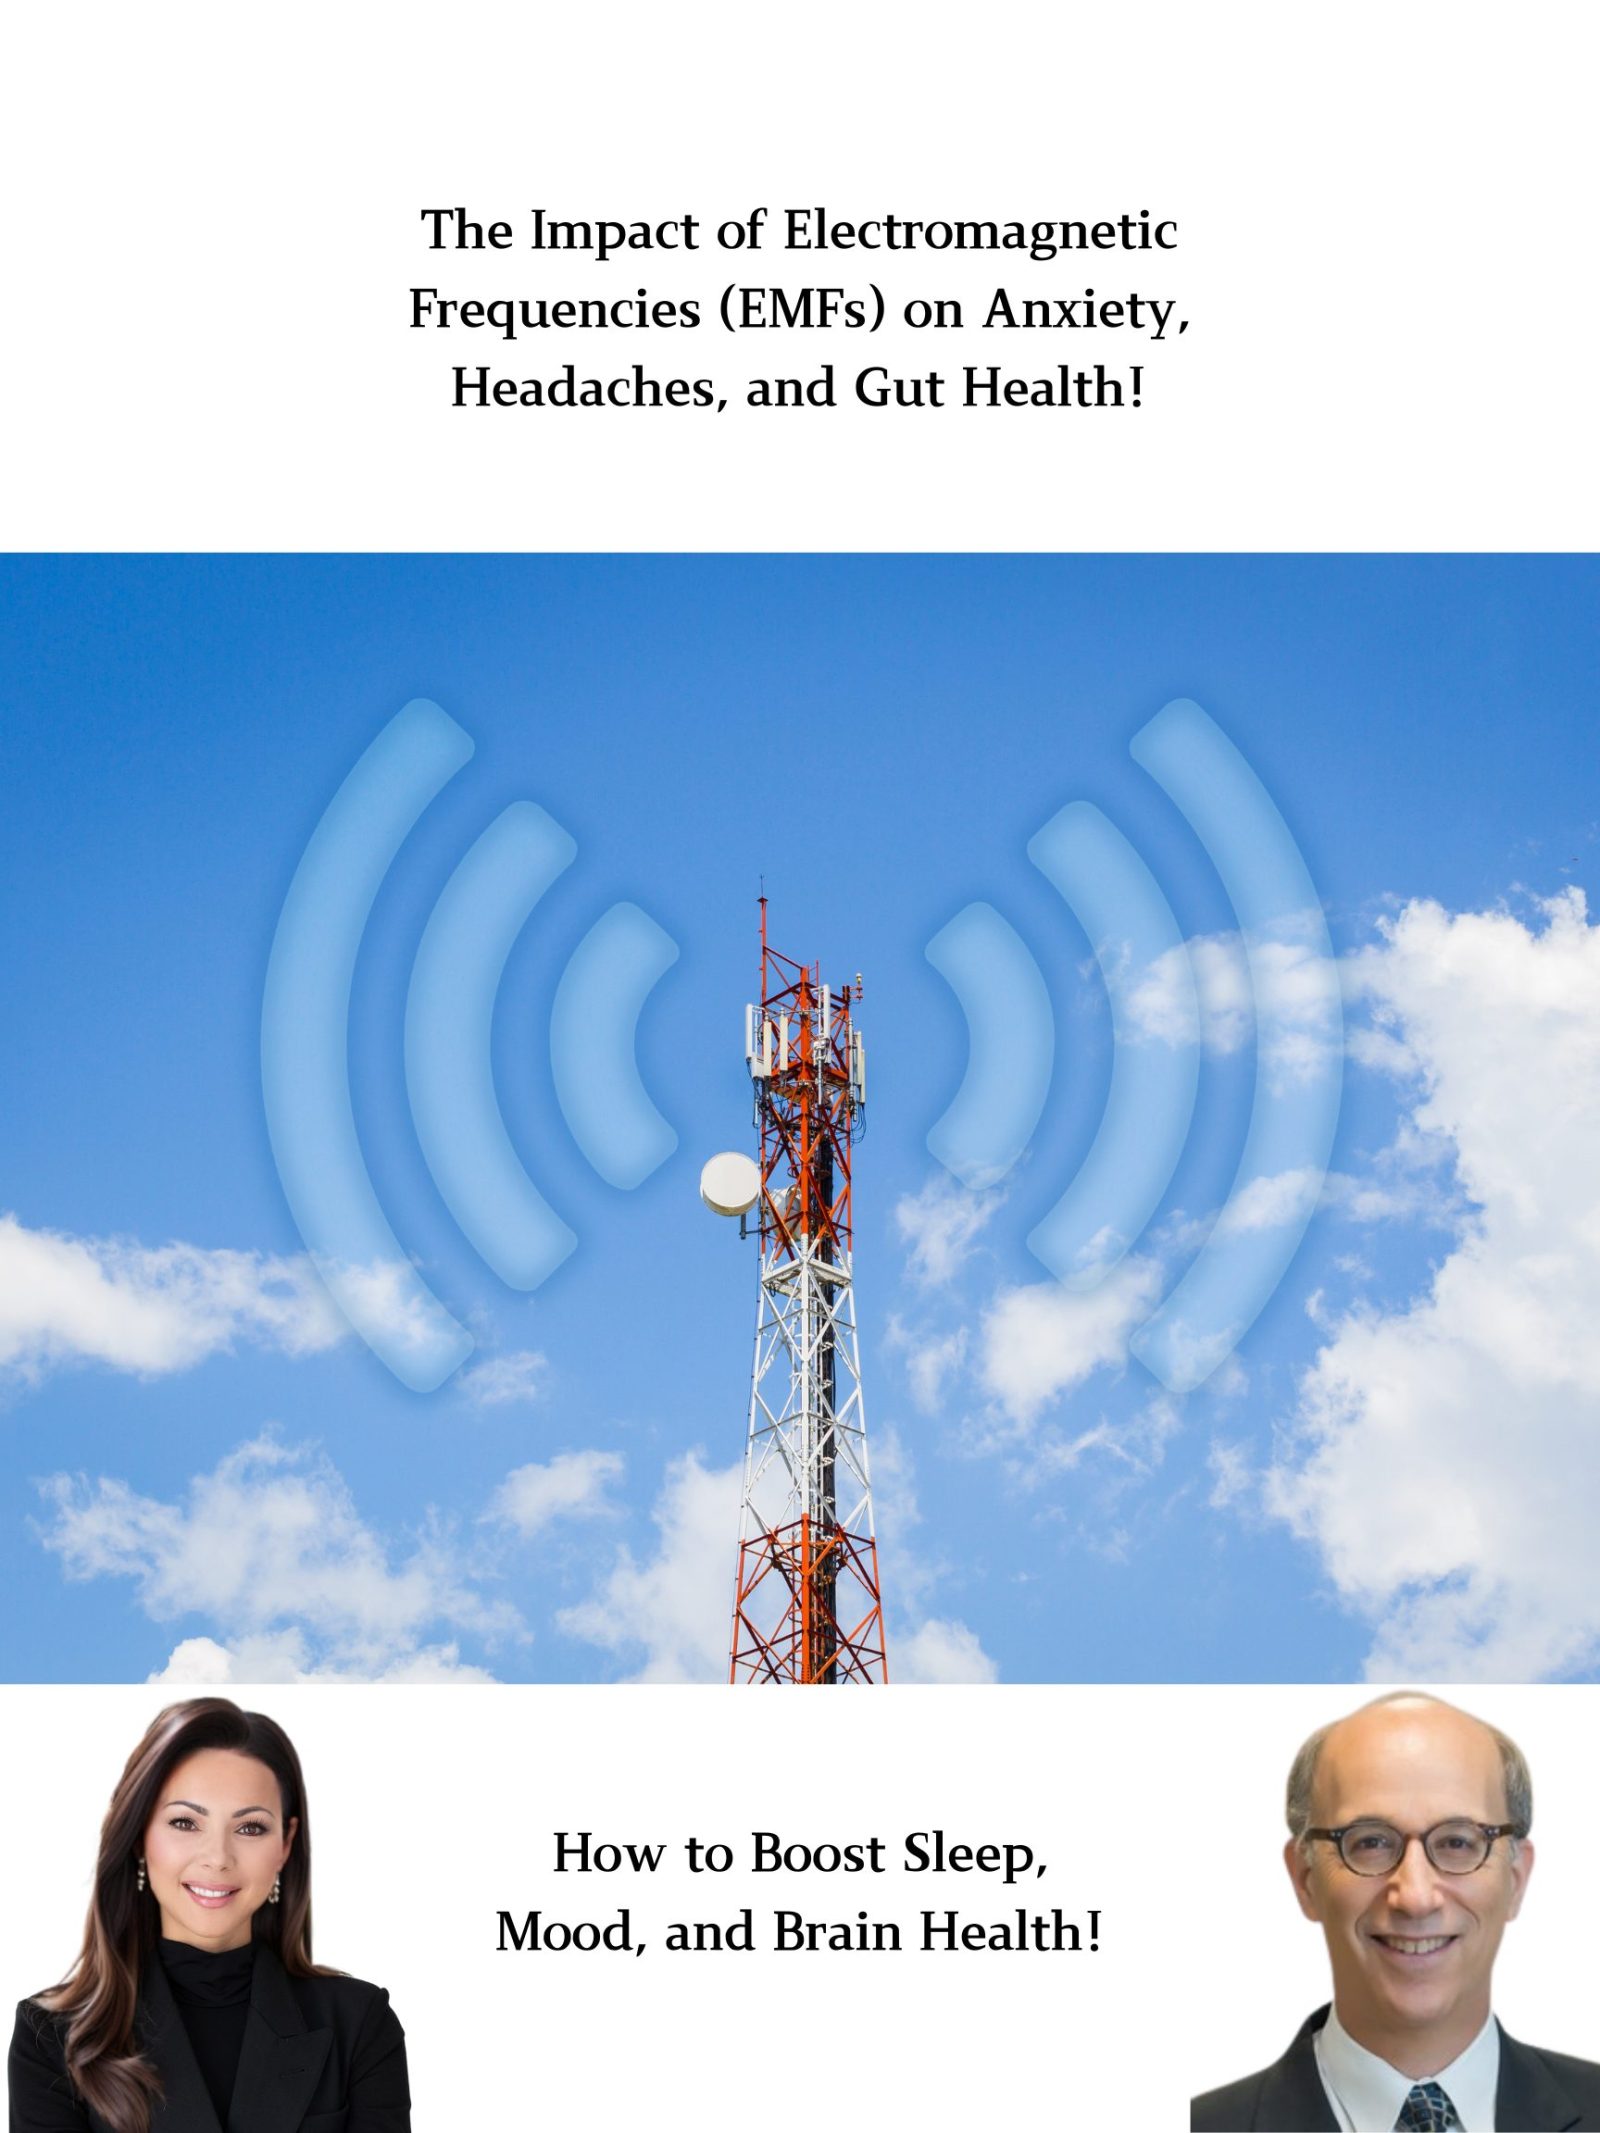 Free Download on Mental Health and "Dirty Electricity"